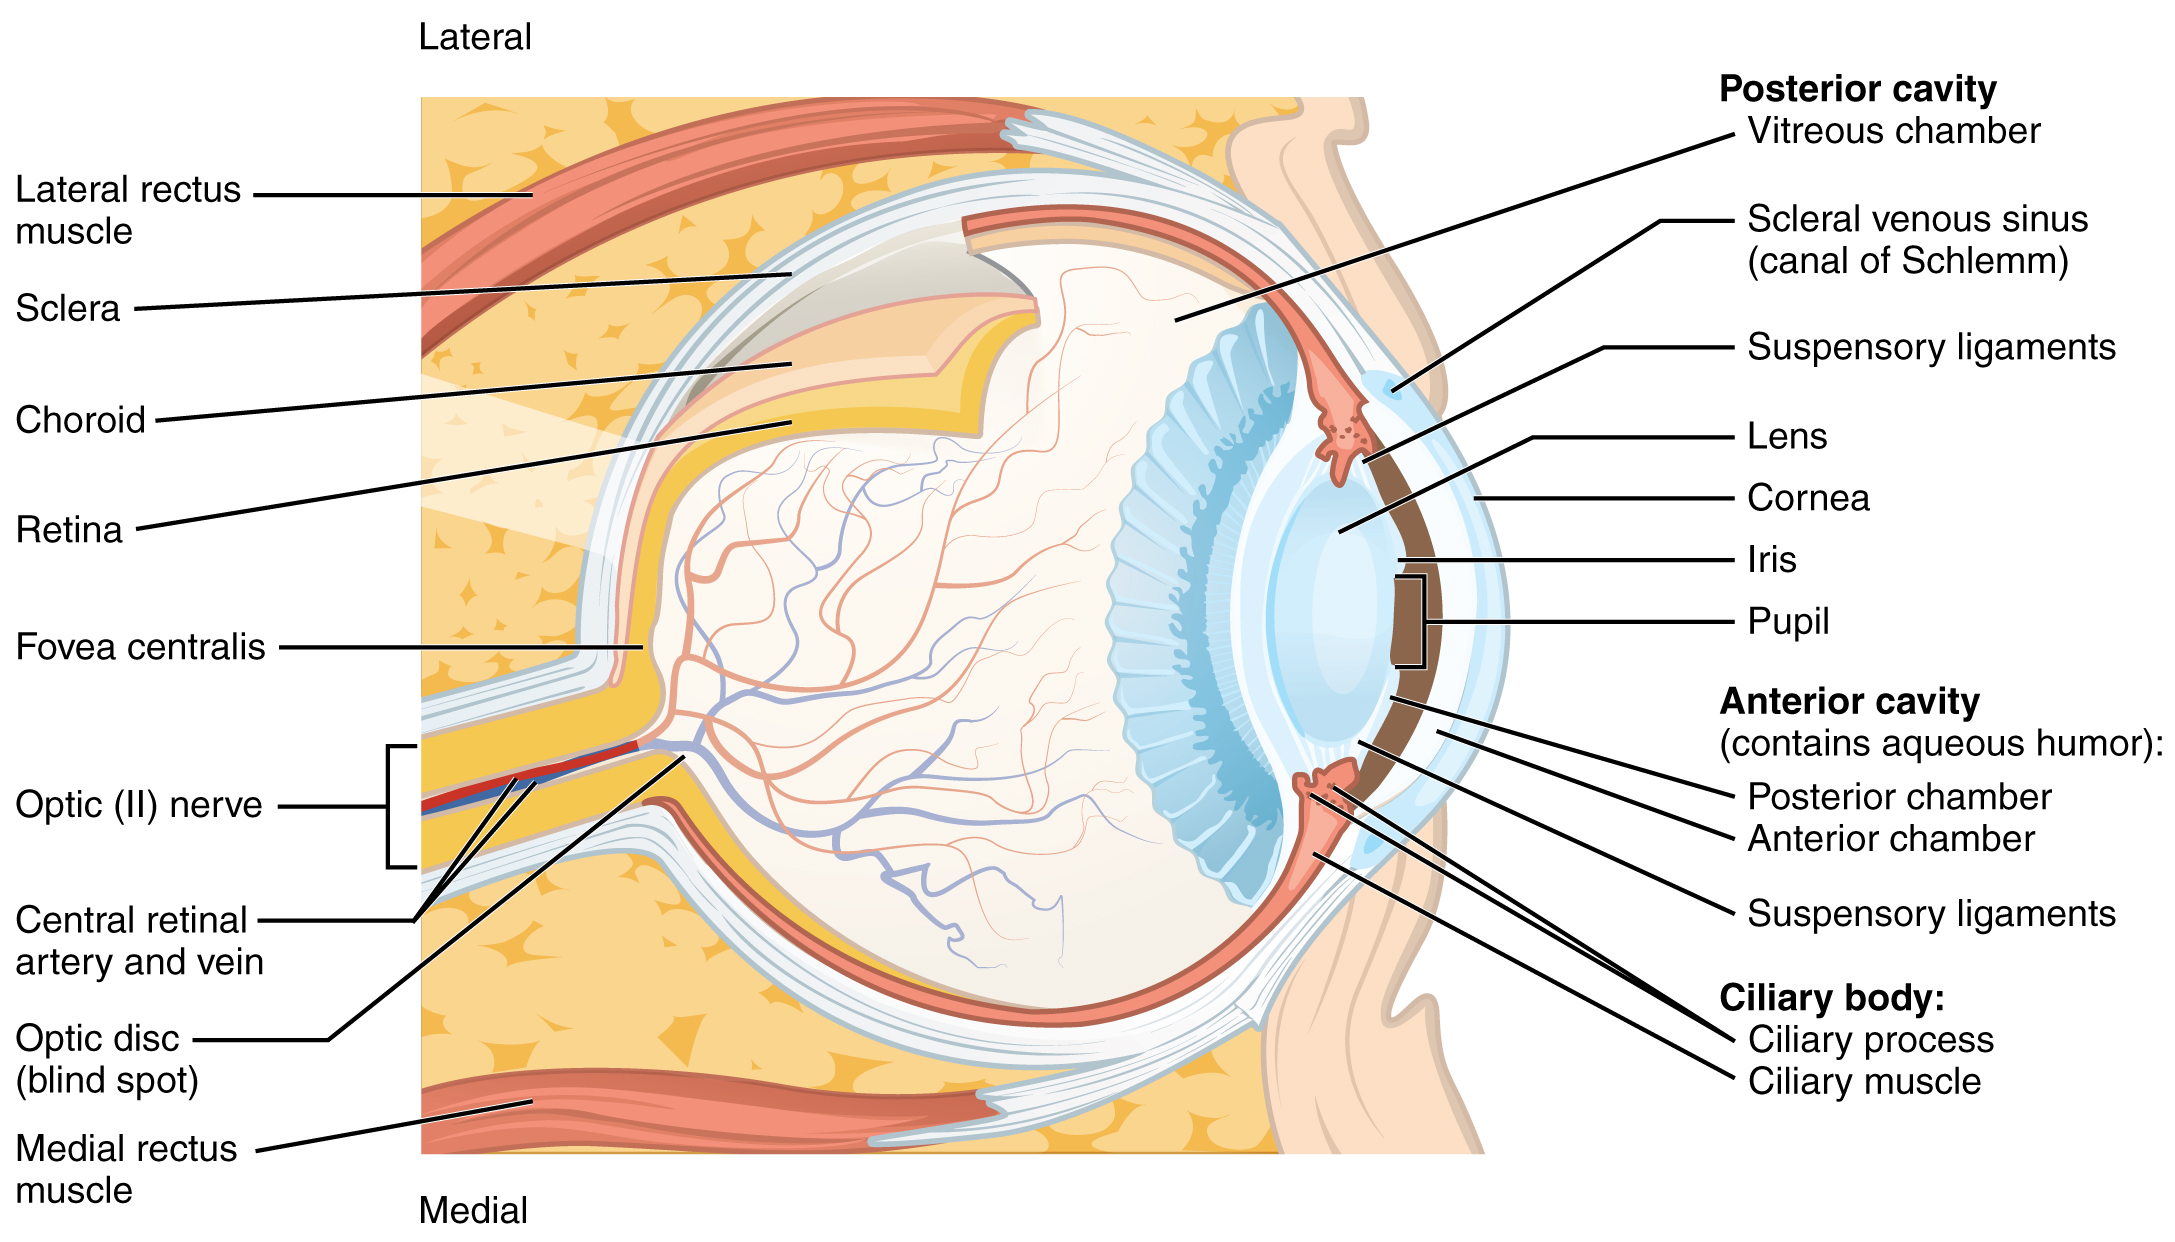 Lateral and medial view of eye ball. Image description available.